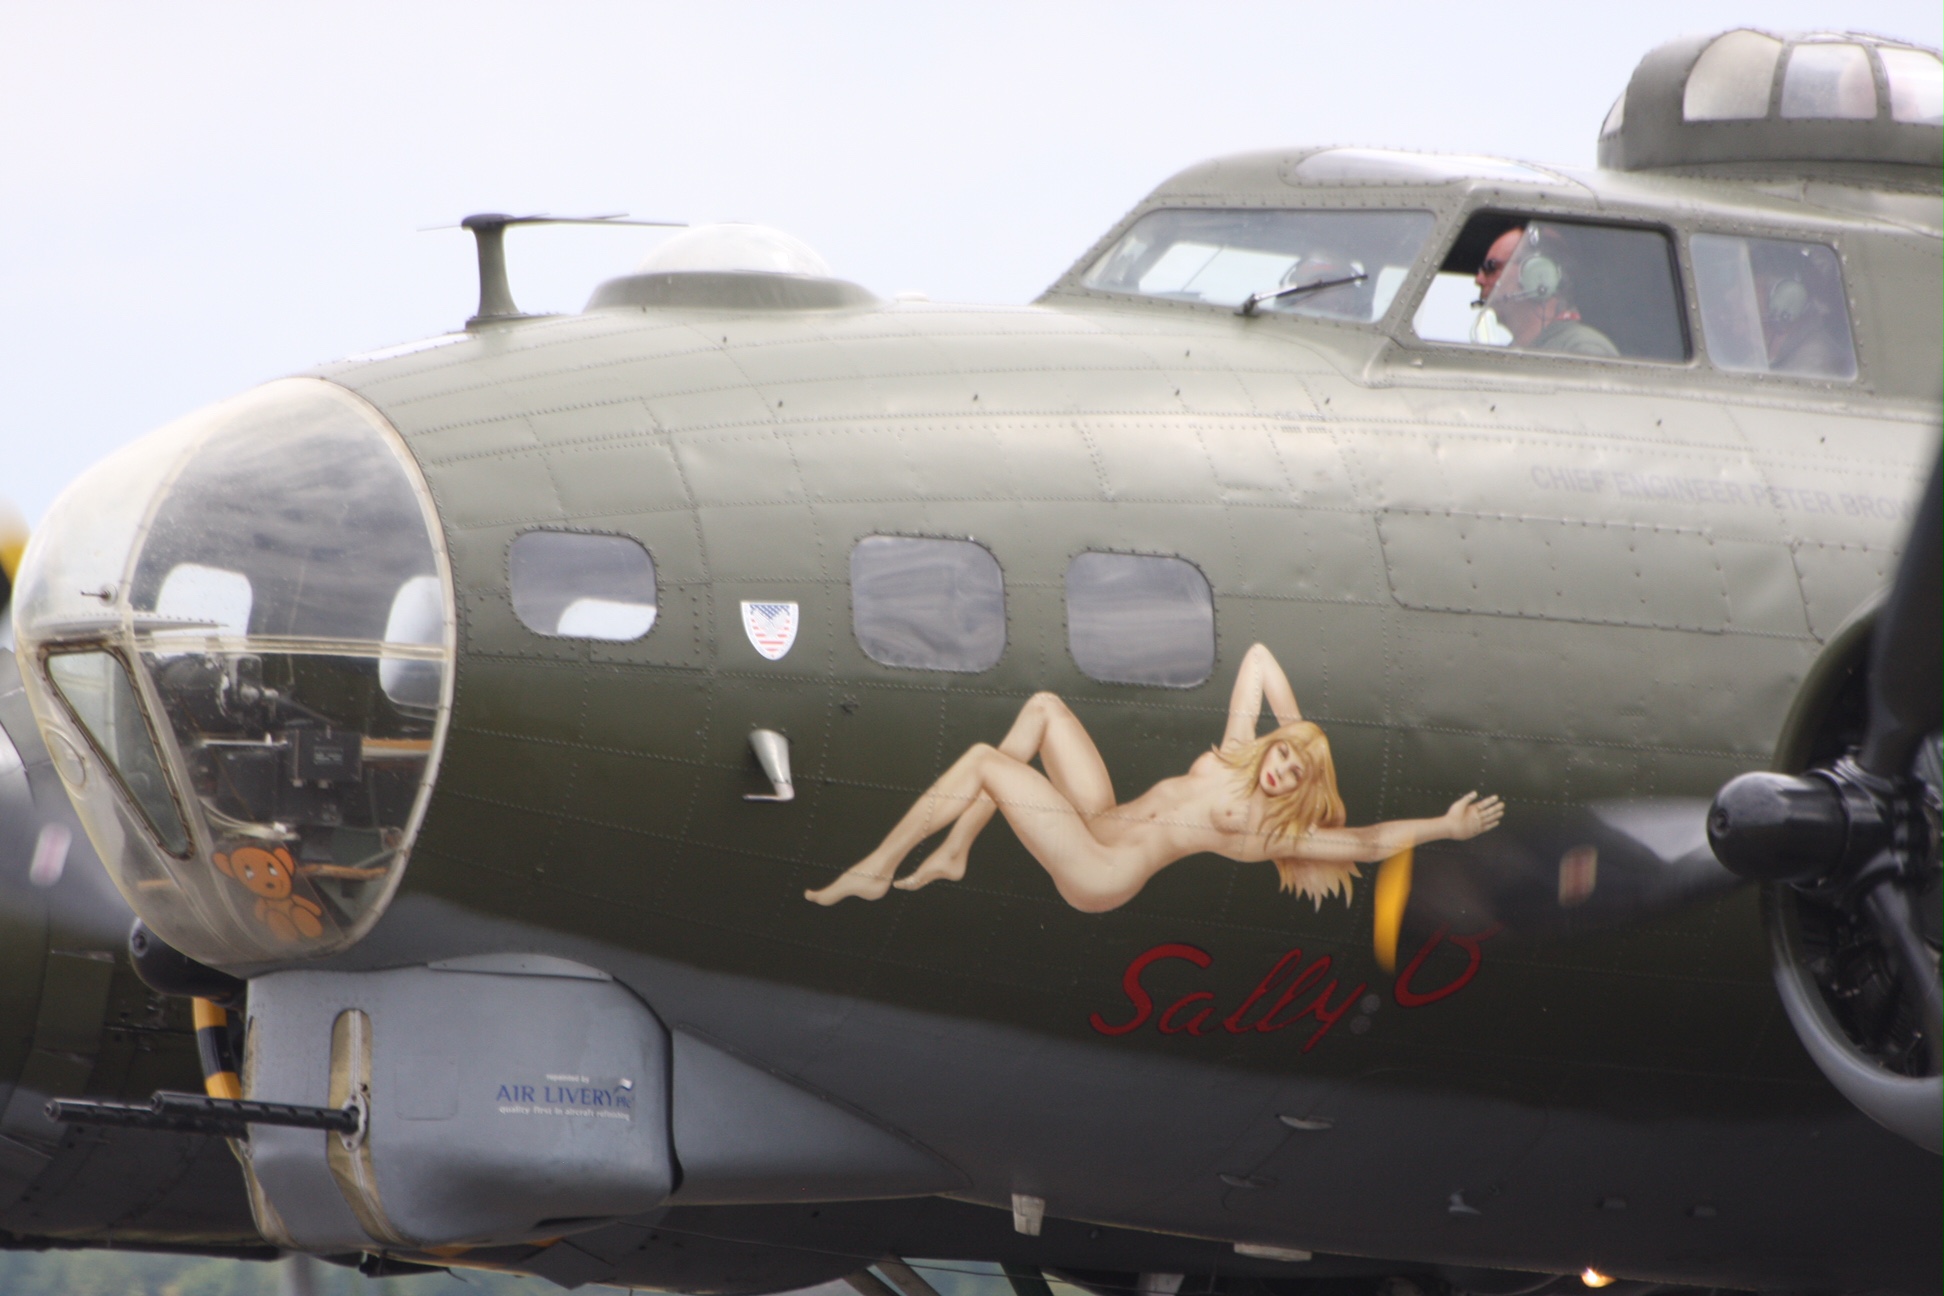 Flying Legends Duxford. Close-up of the nose of "Sally B".